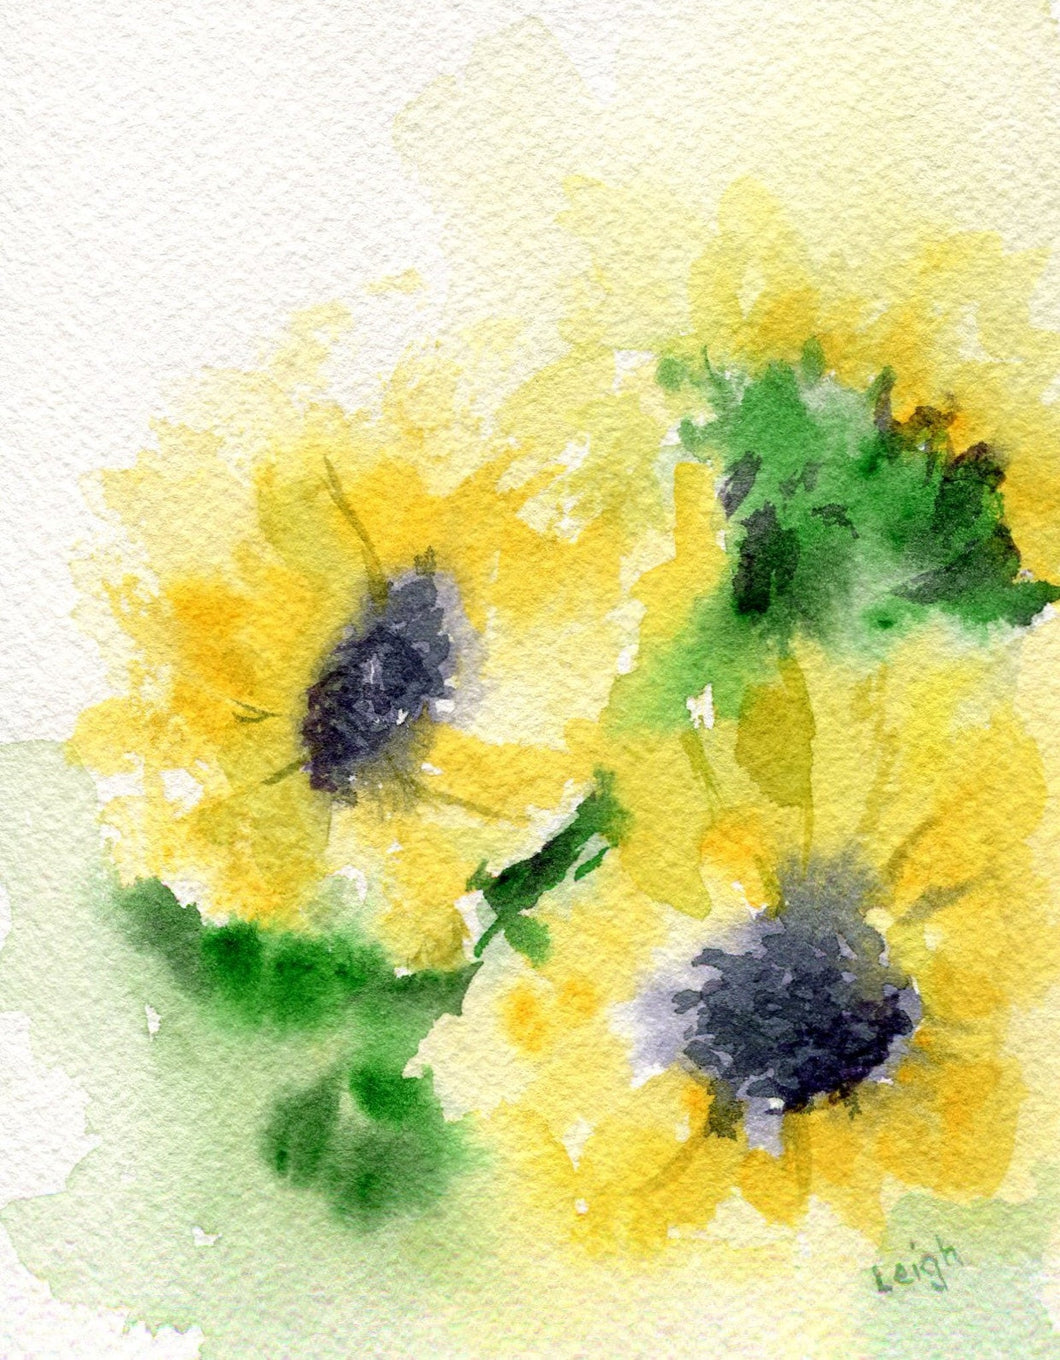 Sunflowers: watercolor floral painting watercolor sunflowers sunflower painting floral painting home decor wall decor yellow green - Leigh Barry Watercolors